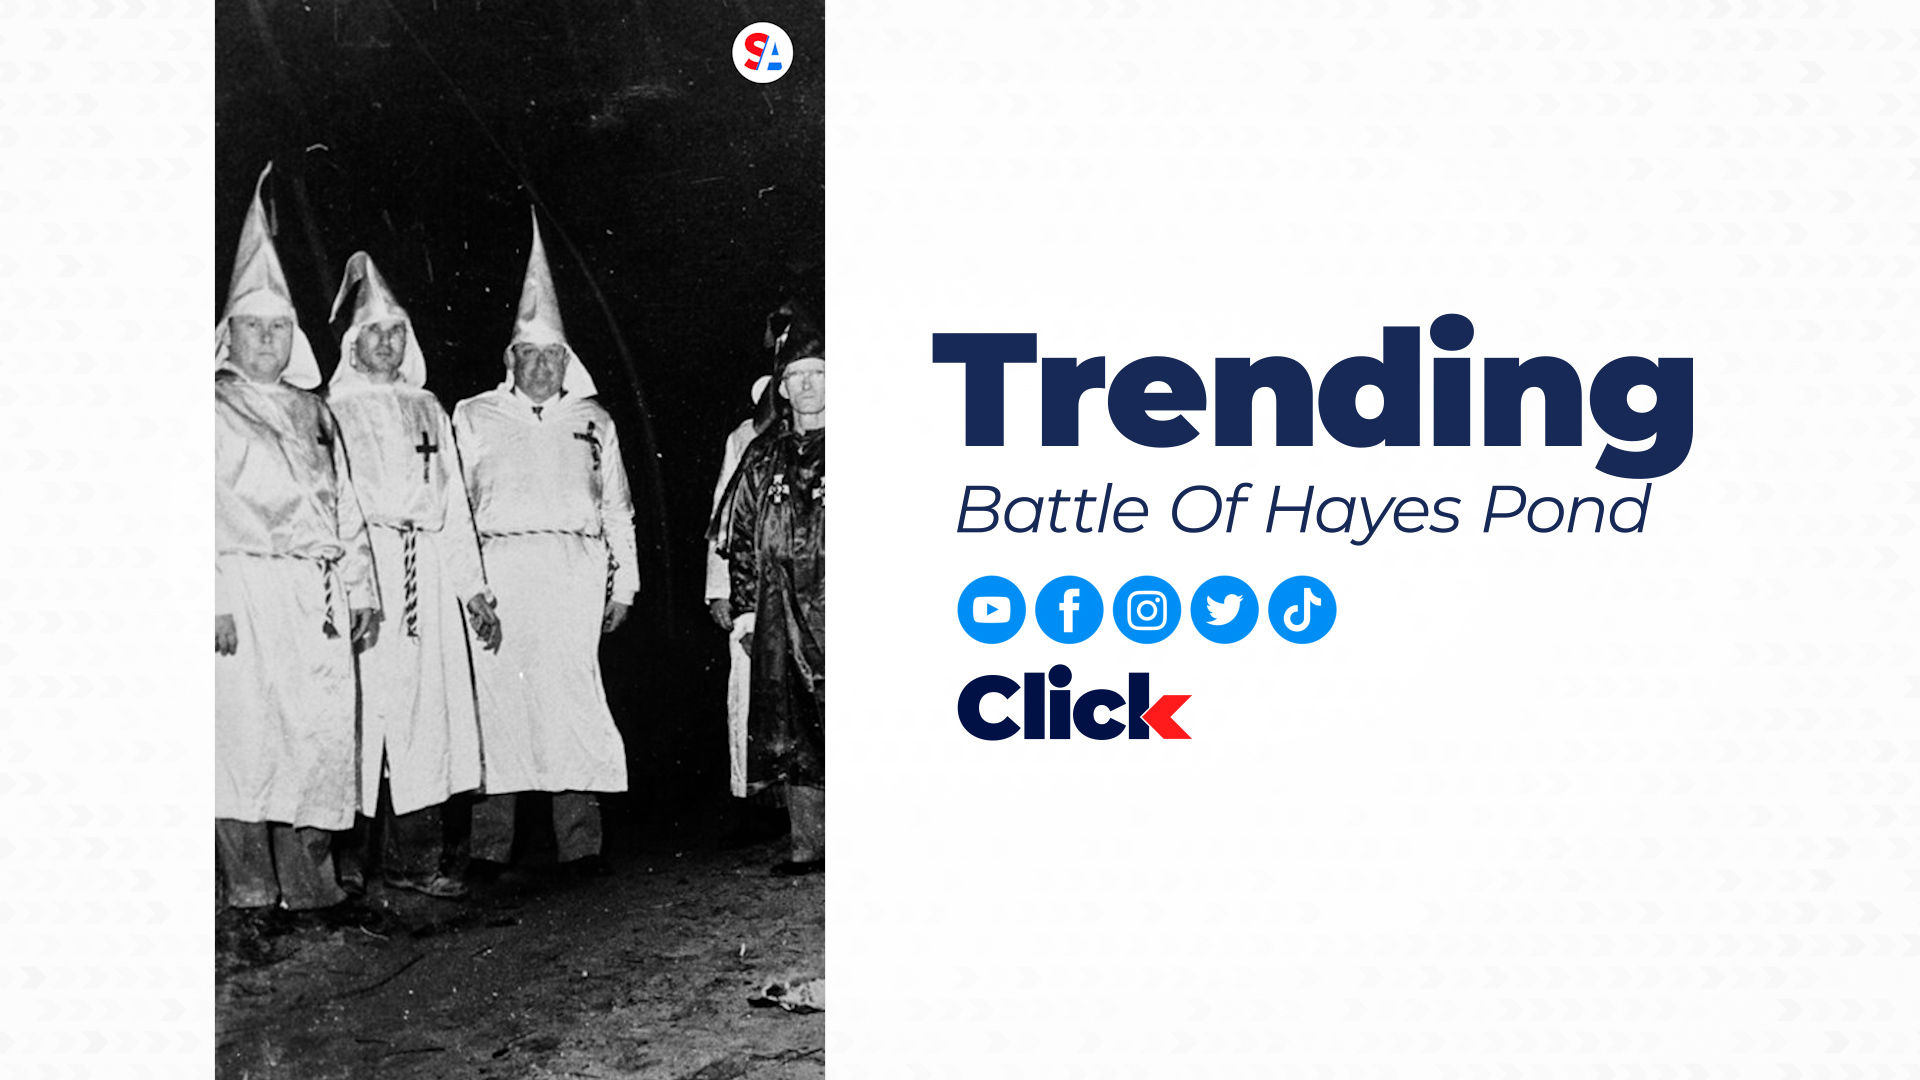 Charles Graham put out a powerful Congressional campaign ad highlighting the Battle of Hayes Pond.